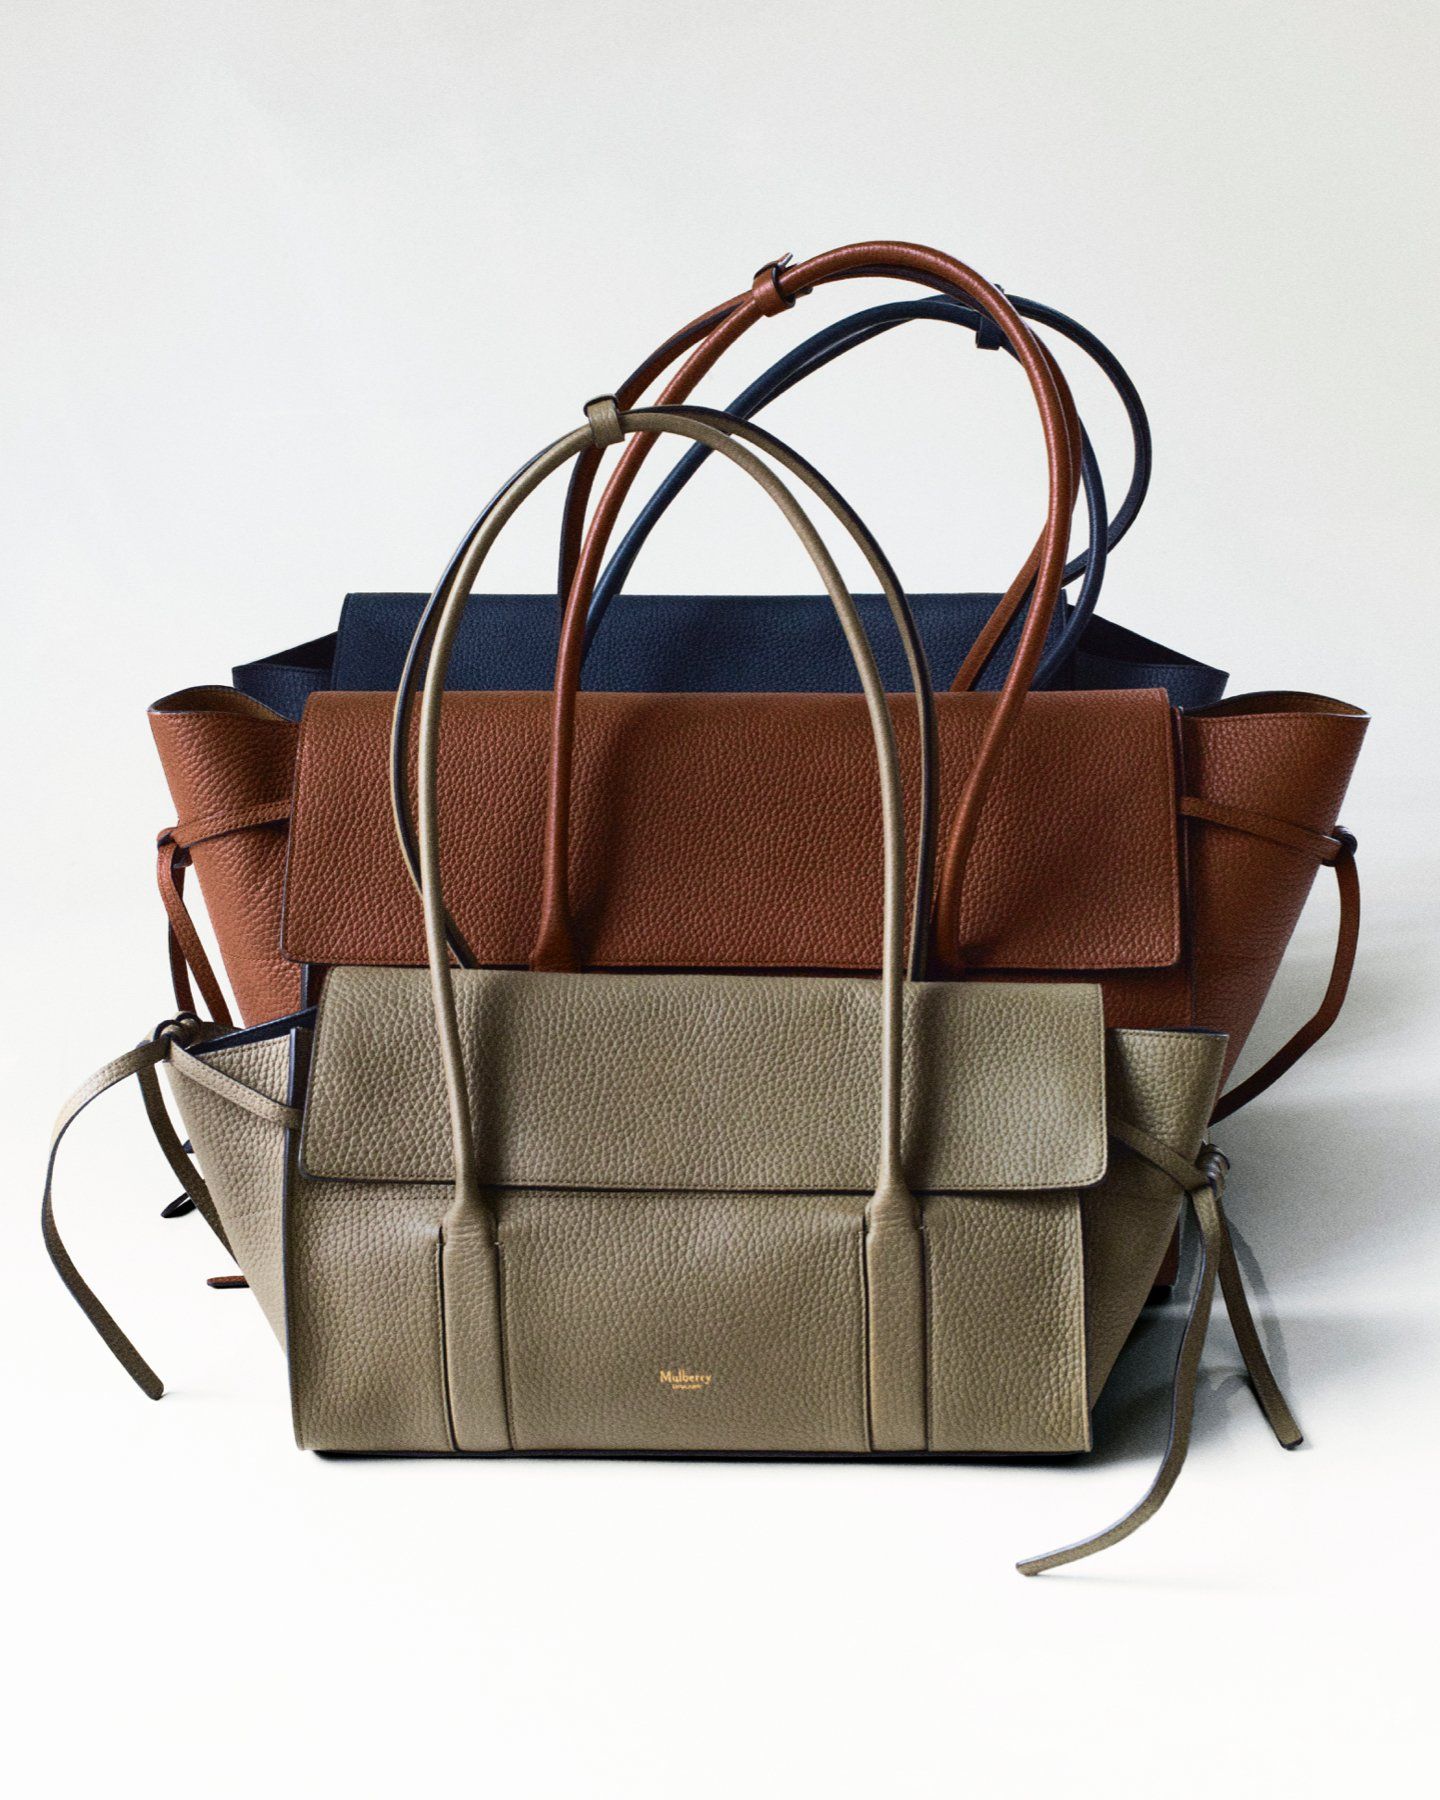 Three Mulberry Soft Bayswater bags in dark leather